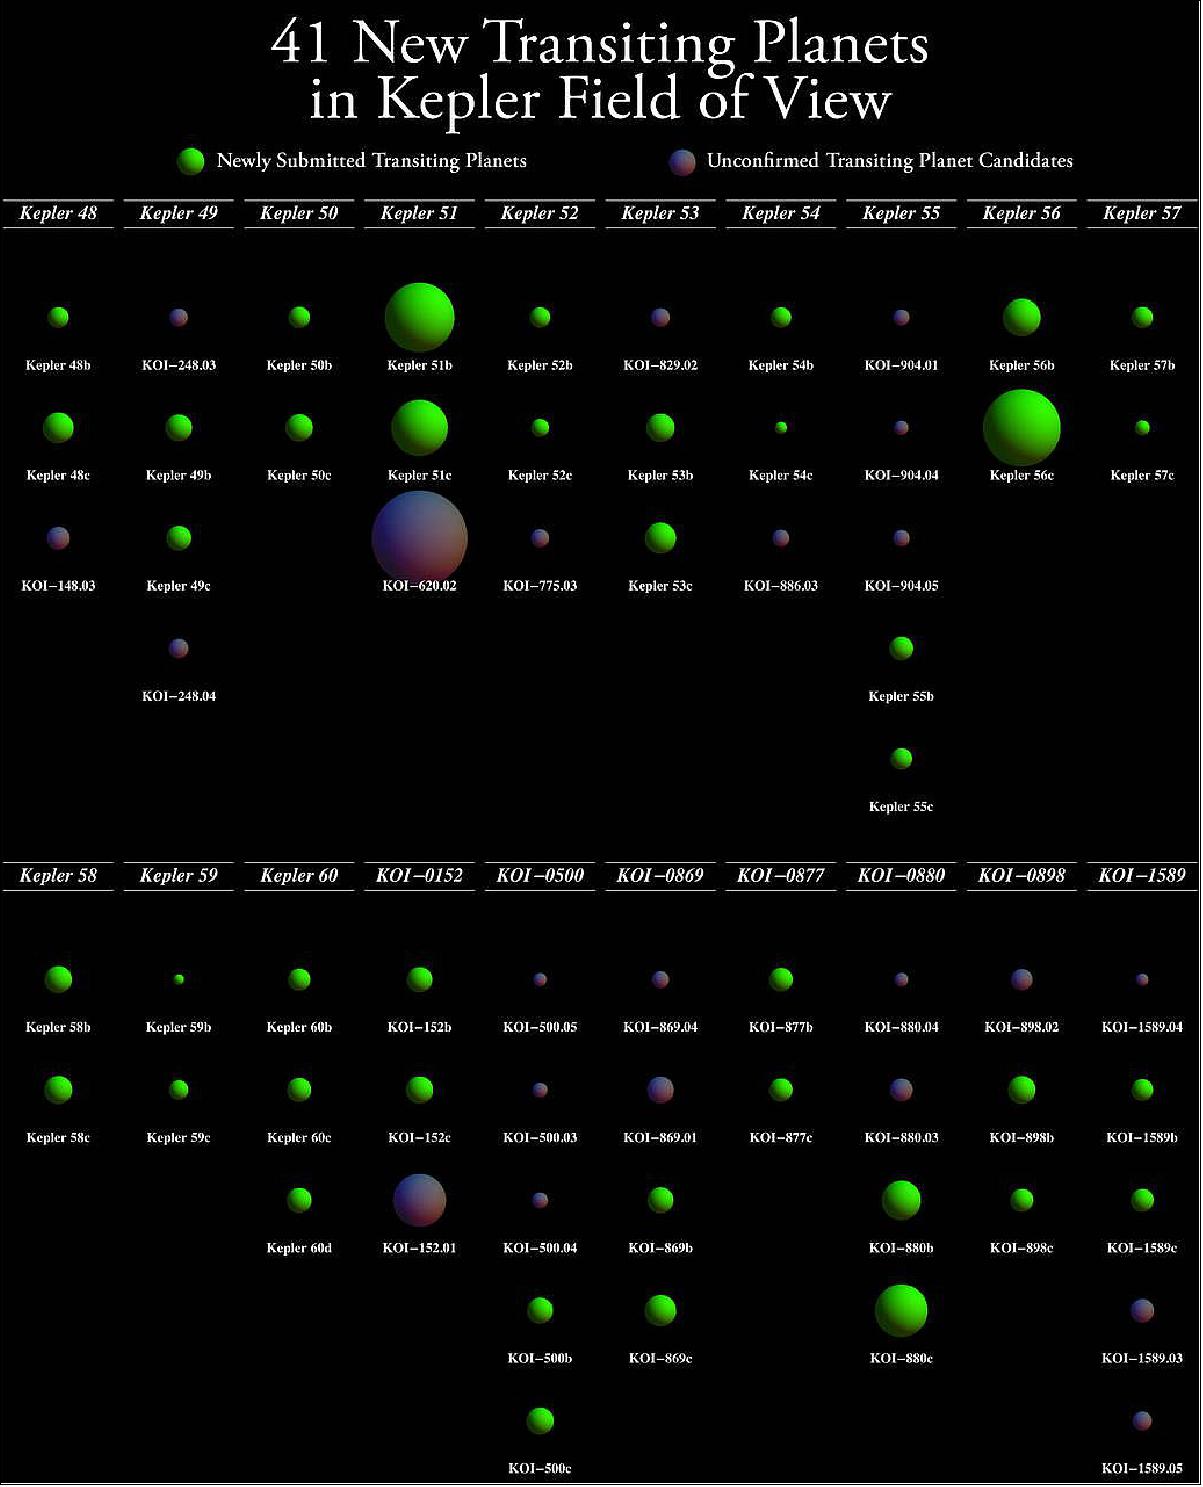 Figure 68: The diagram shows the newly submitted transiting planets in green along with the unconfirmed planet candidates in the same system in violet. The systems are ordered horizontally by increasing Kepler number and KOI (Kepler Object of Interest) designation and vertically by orbital period (image credit: Jason Steffen, Fermilab Center for Particle Astrophysics)